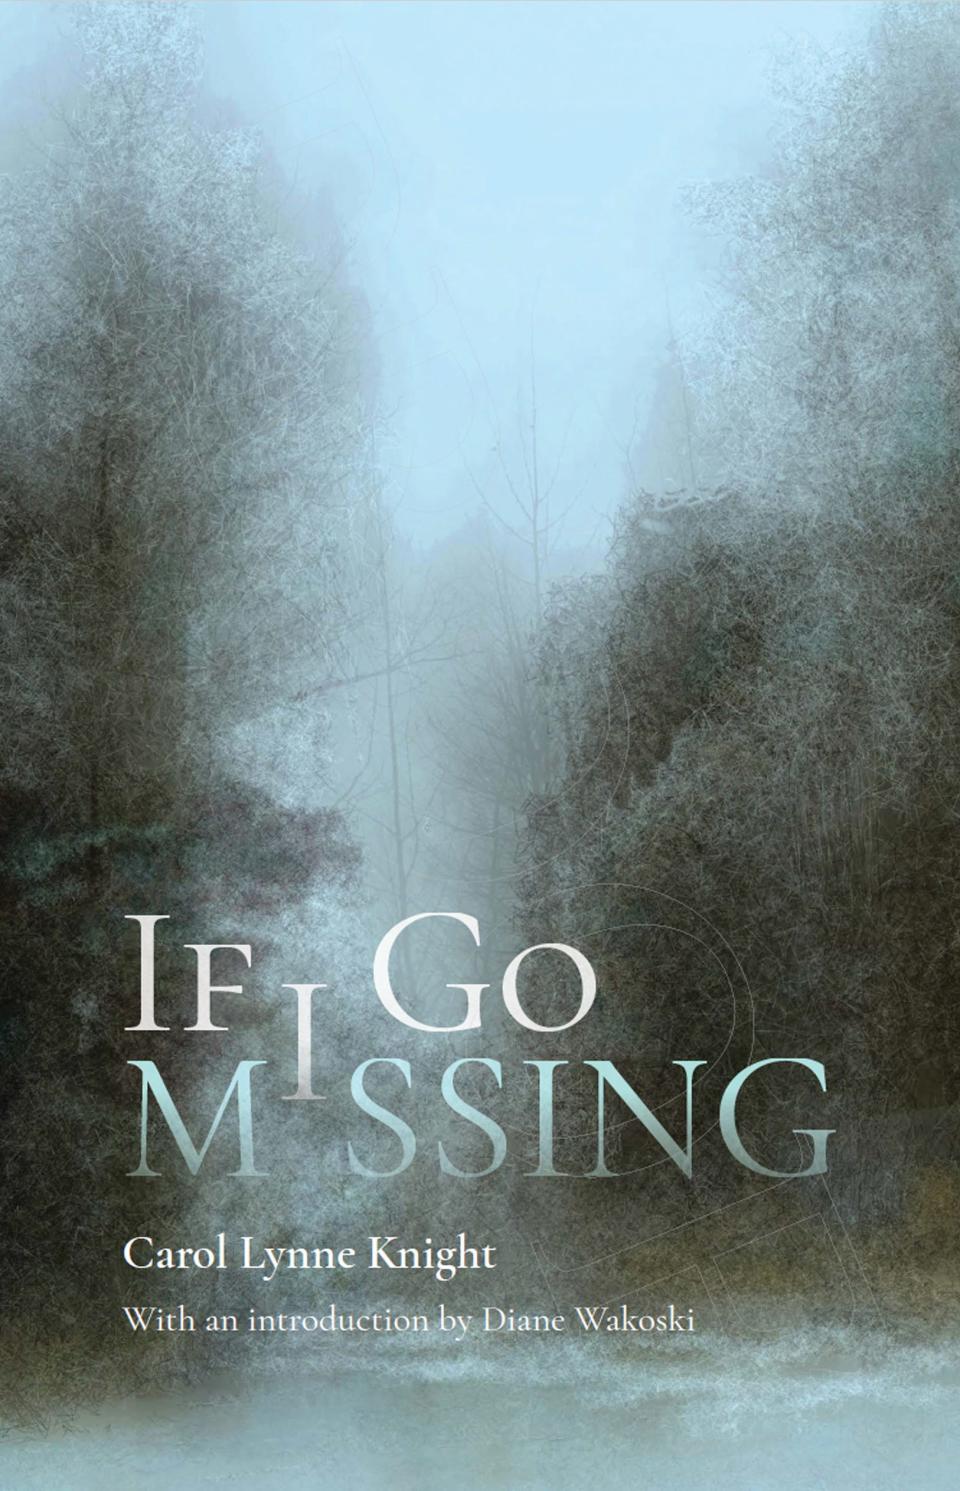 Carol Lynne Knight will give a reading from "If I Go Missing" on Sept. 13, 2022.